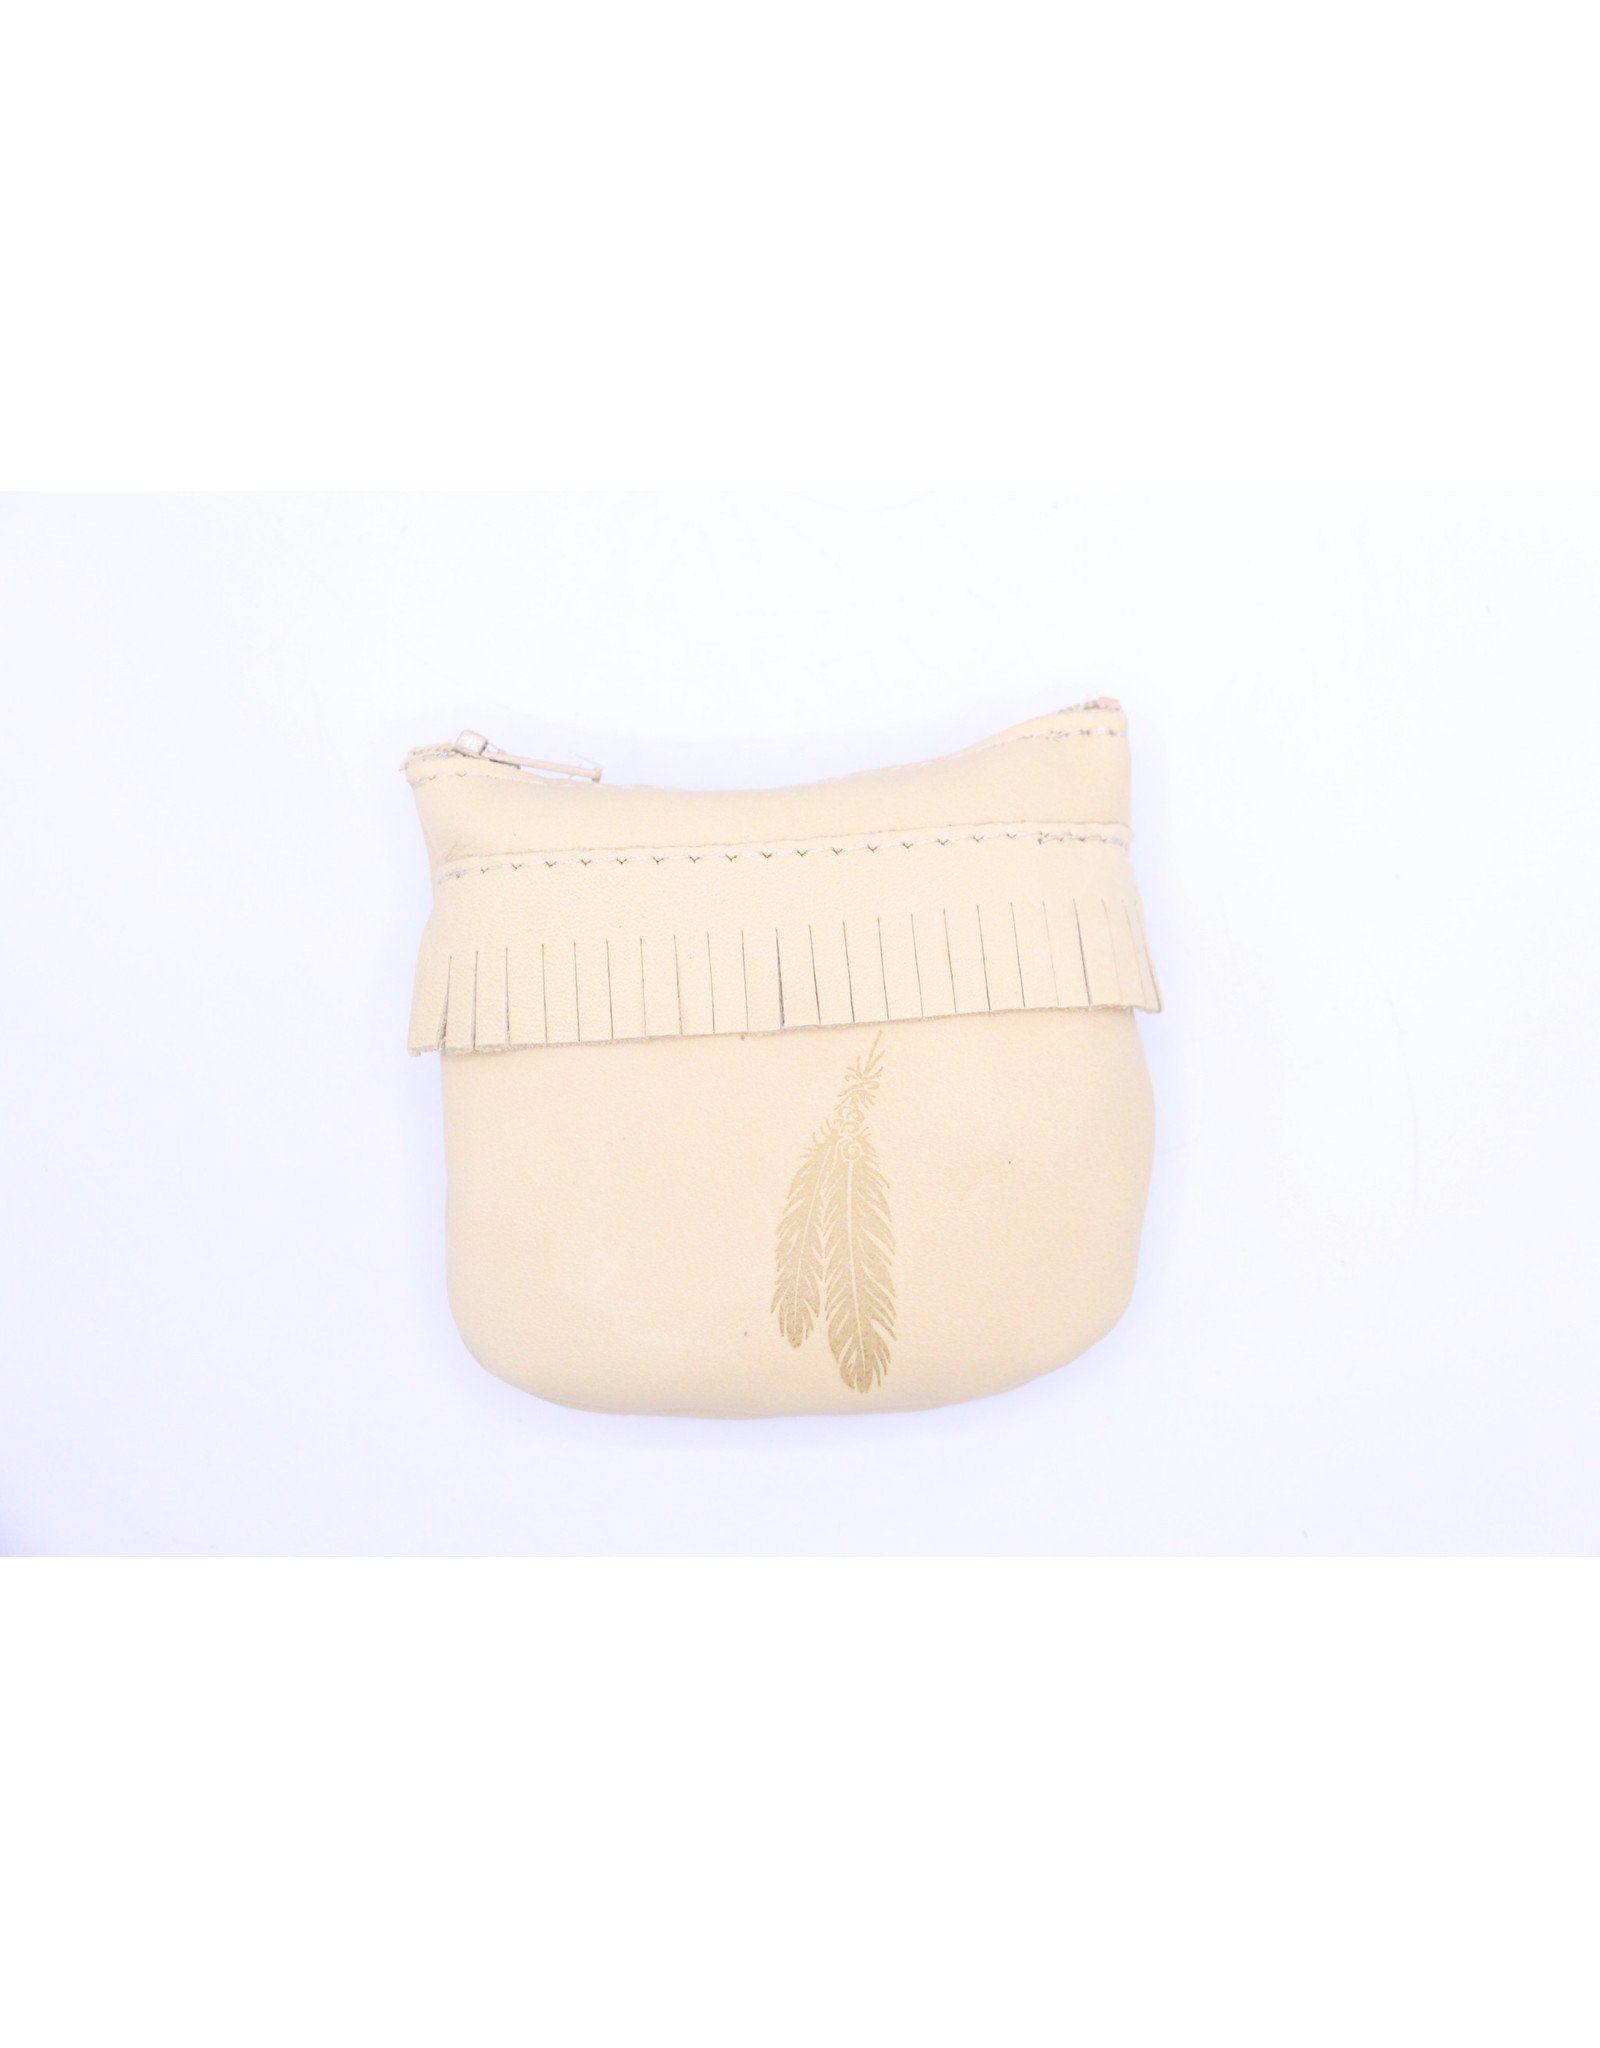 Small Leather Coin Purse 202 Cream - Feather